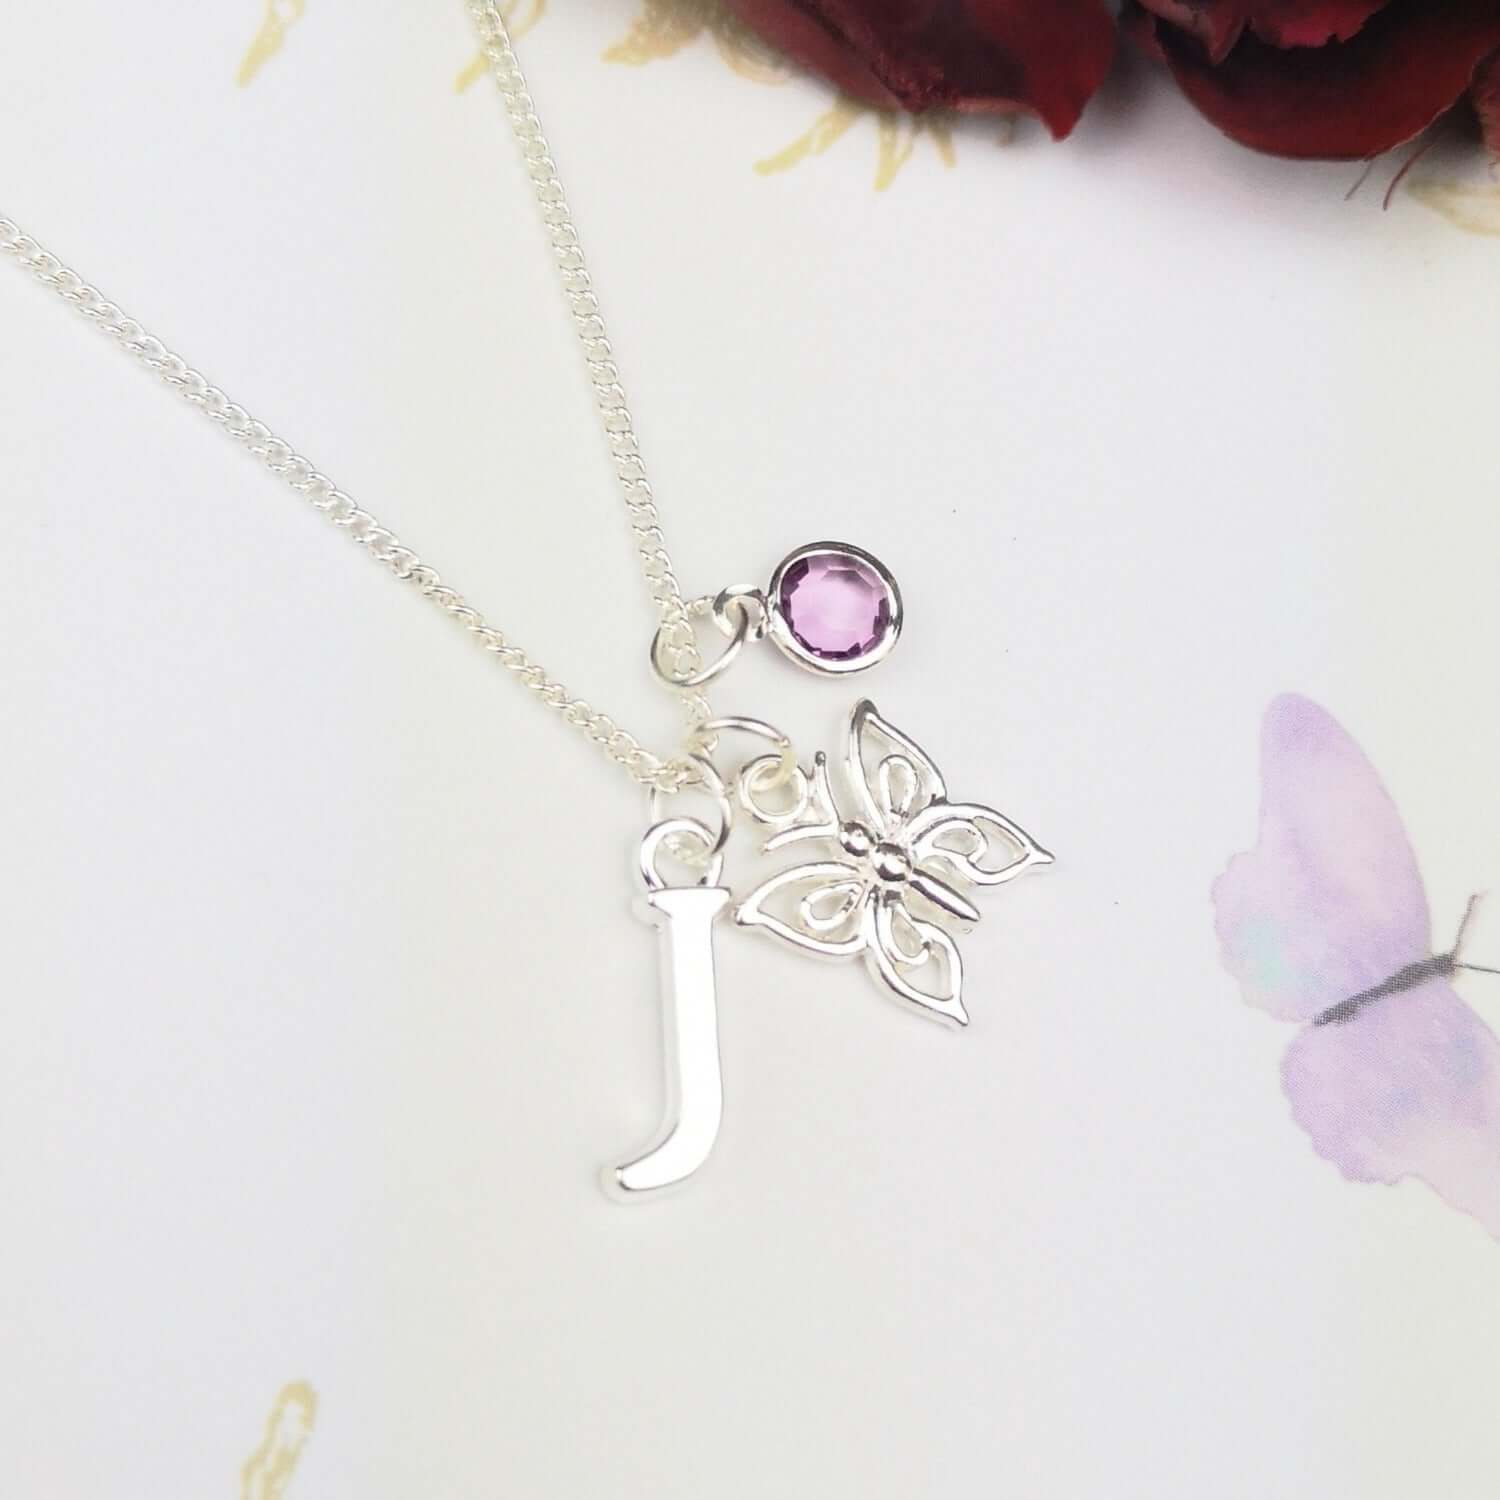 Personalised butterfly necklace